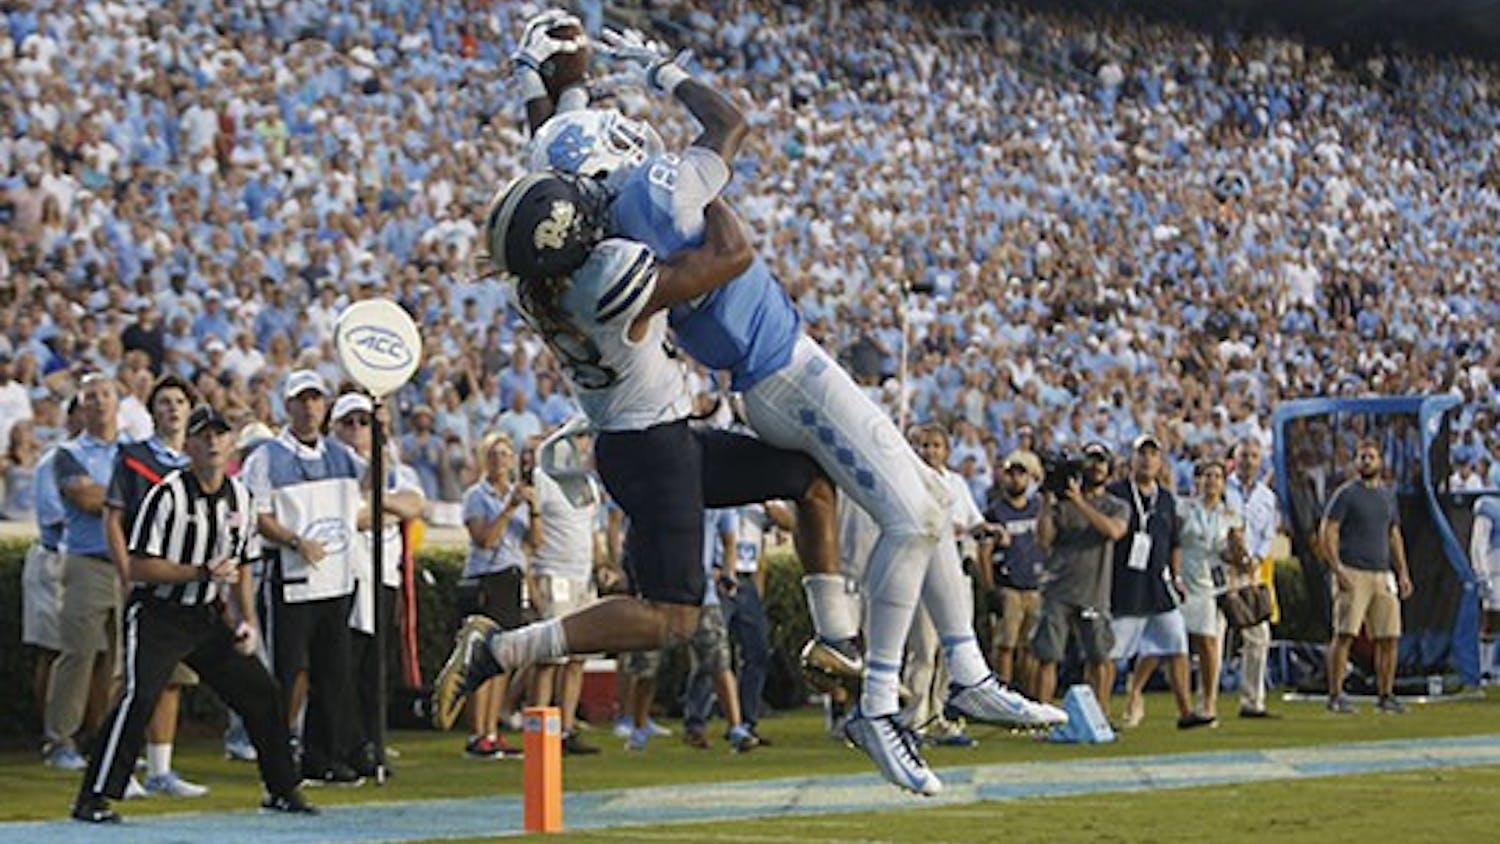 UNC wide receiver Bug Howard catches the game winning touchdown with two seconds remaining in regulation against Pitt.